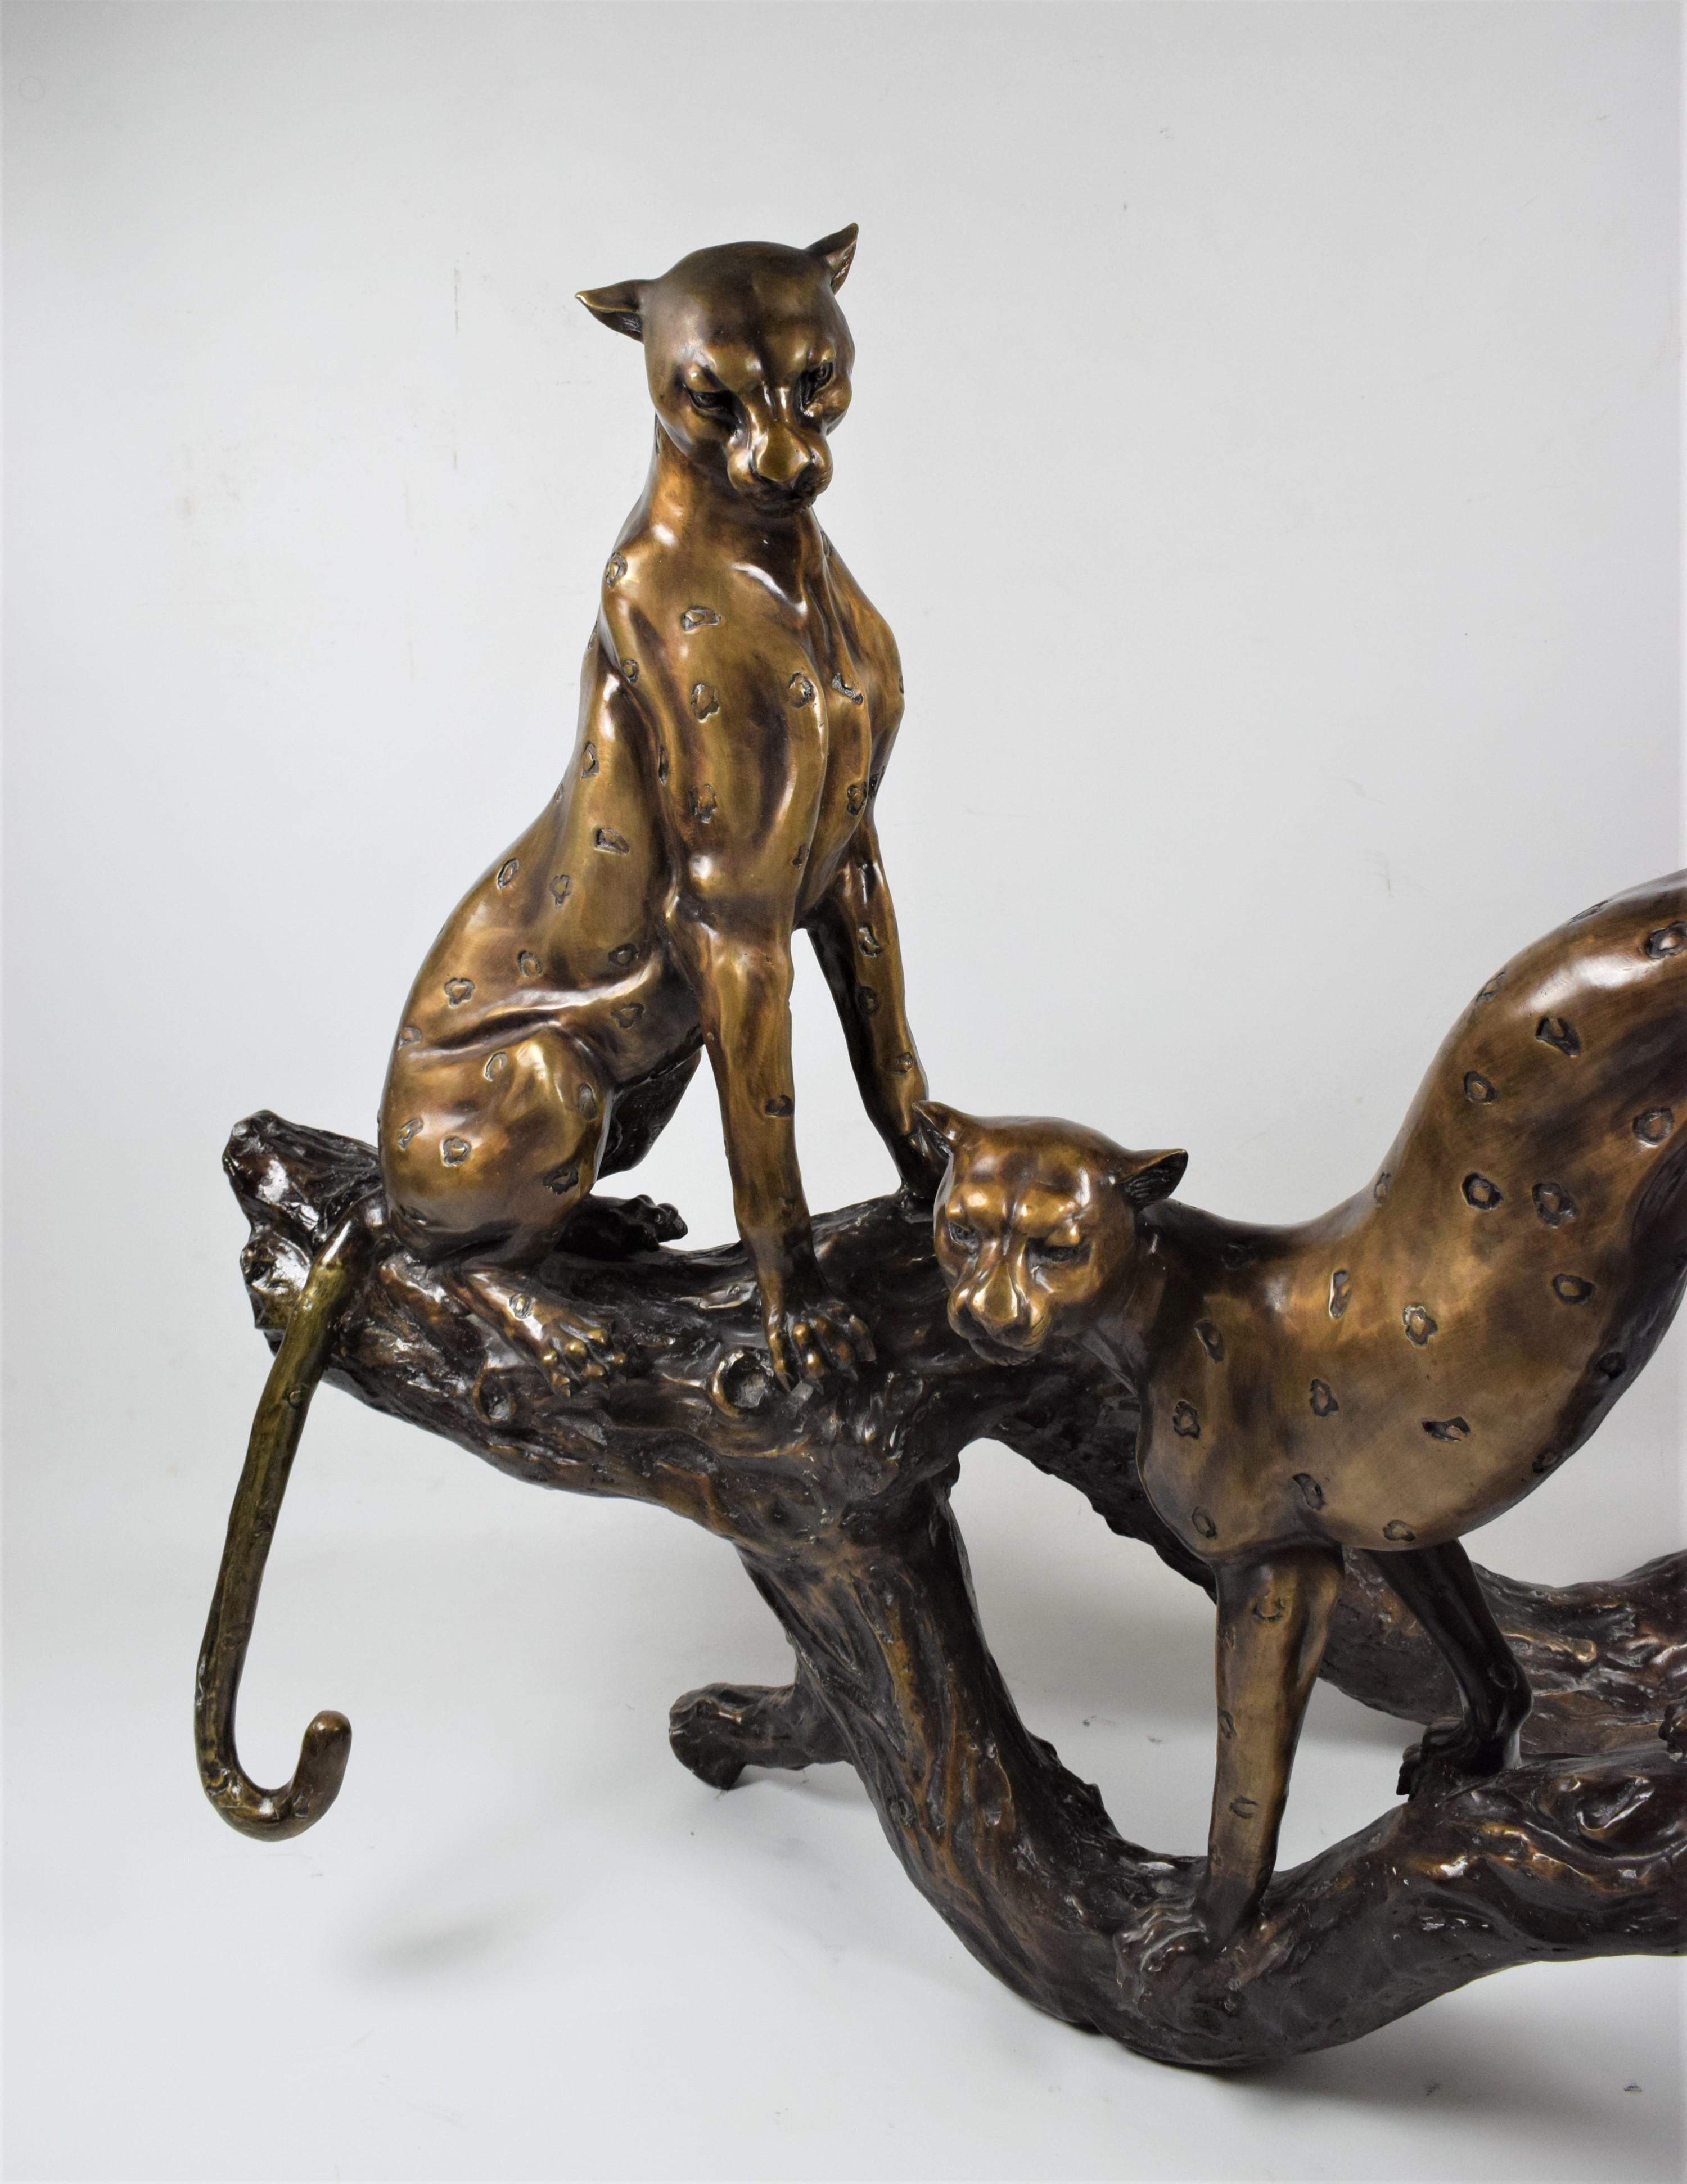 The bronze art deco sculpture portrays a captivating scene featuring two cheetahs in a relaxed yet alert pose, perched on a majestic tree trunk. With exquisite craftsmanship, the sculpture captures the grace and elegance of these magnificent